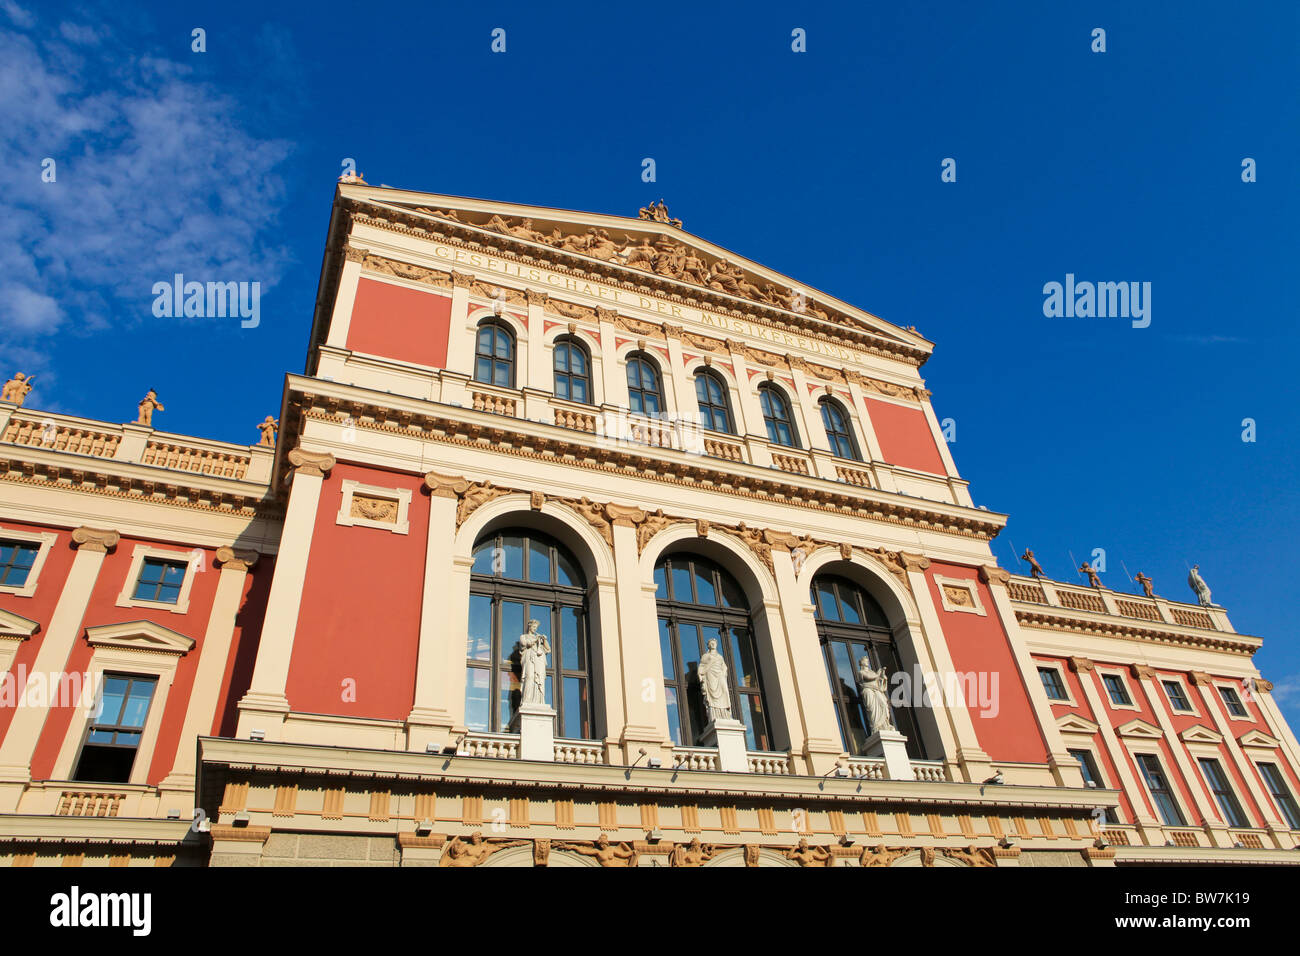 The Wiener Musikverein (English: 'Viennese Music Association') is a famous Vienna concert hall. Stock Photo